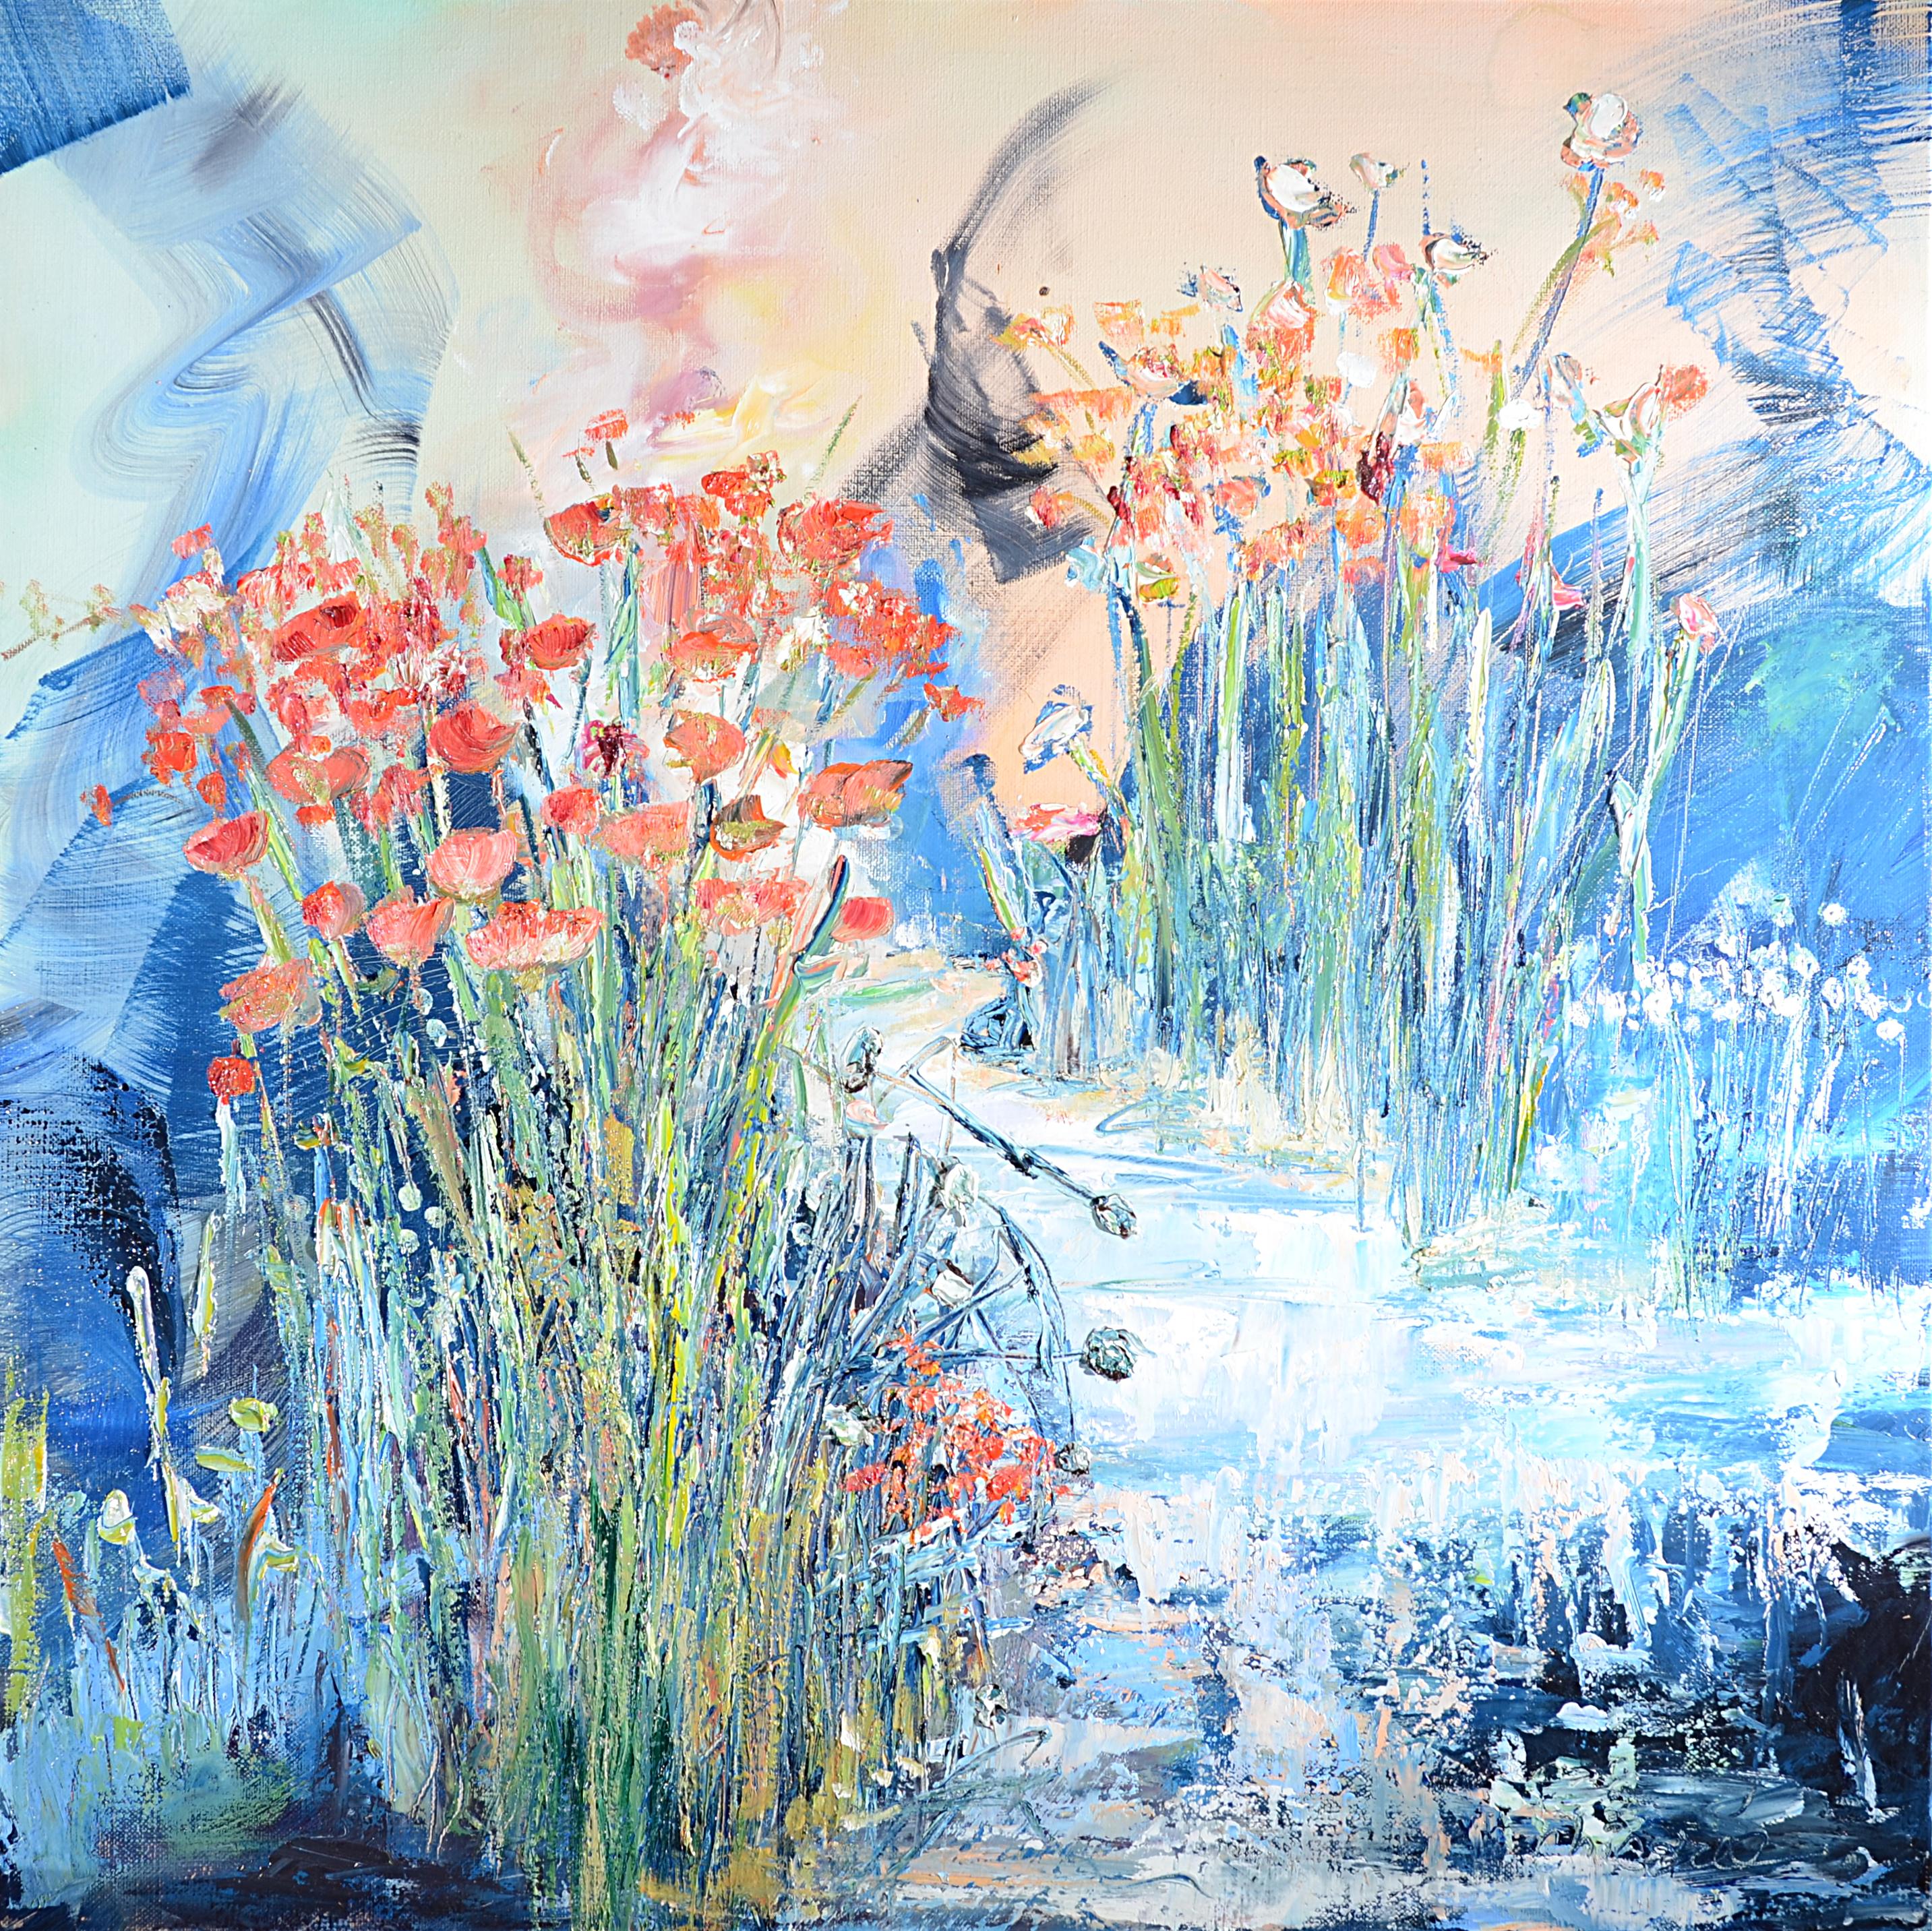 Chicorée Abstract Painting - "Angel's Garden", Colorful Abstract Landscape Squared Oil Painting